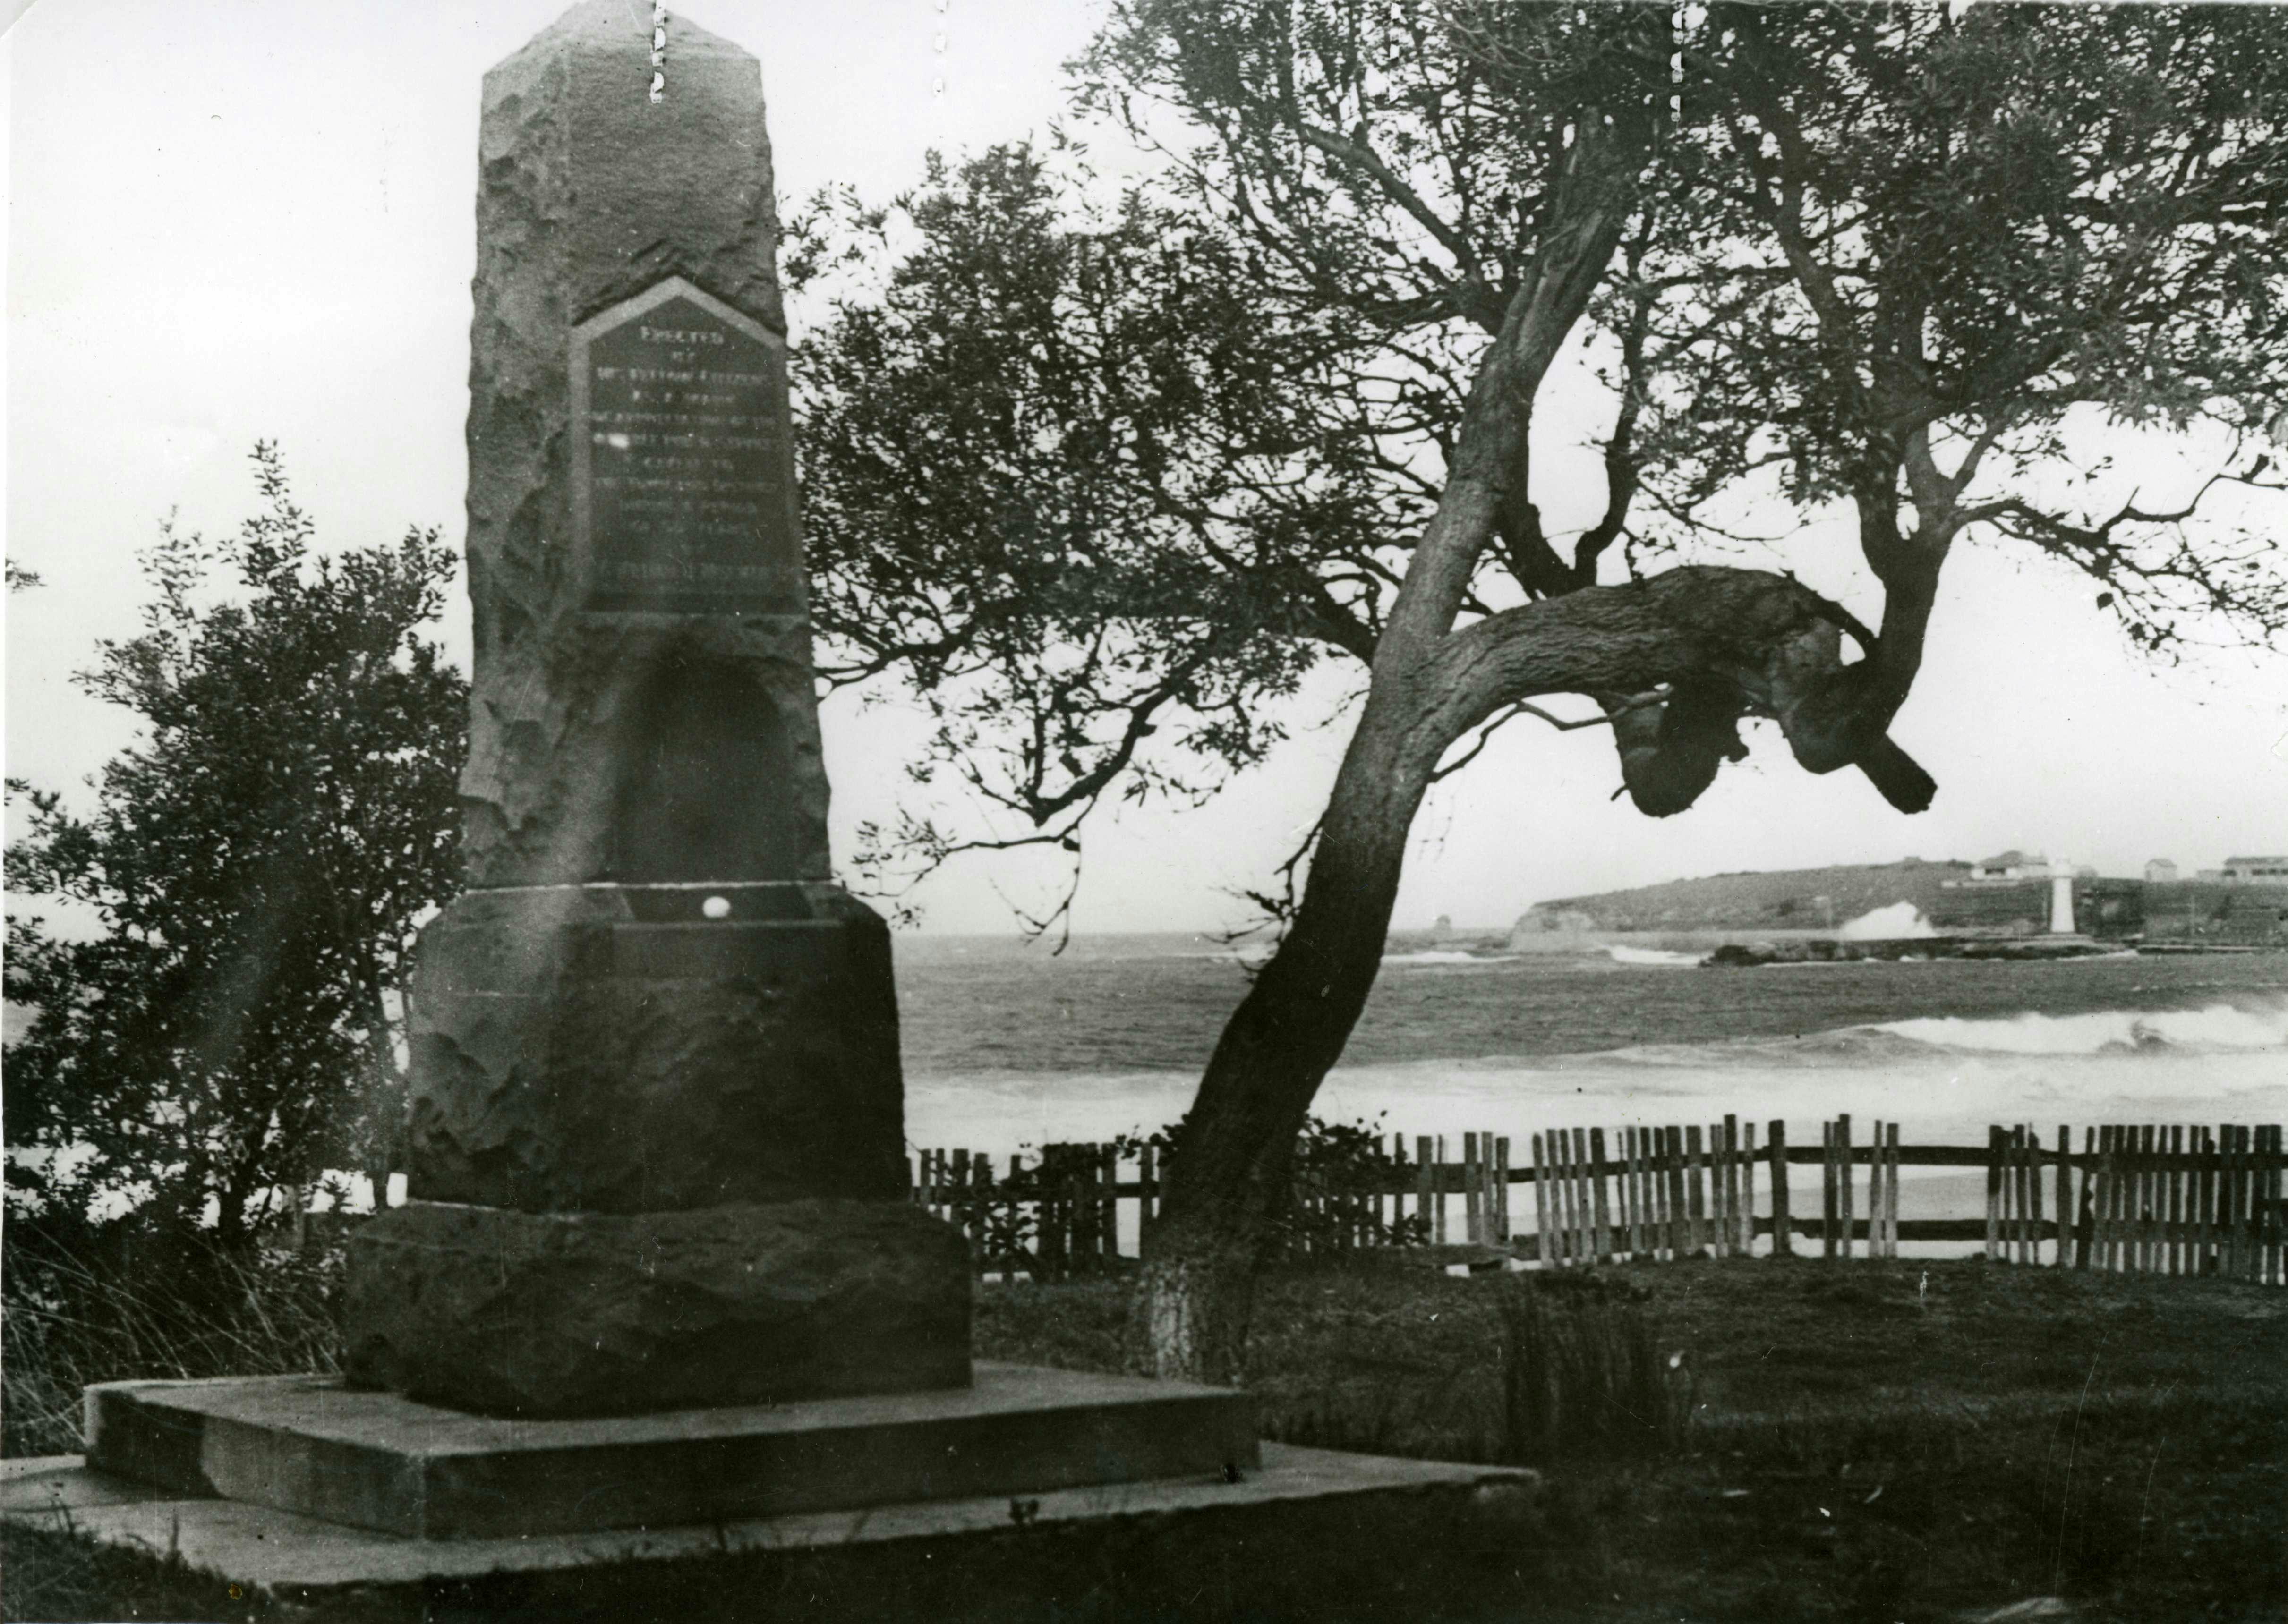 Original location of the William Wiseman memorial (Wollongong City Library, Local Studies collection)